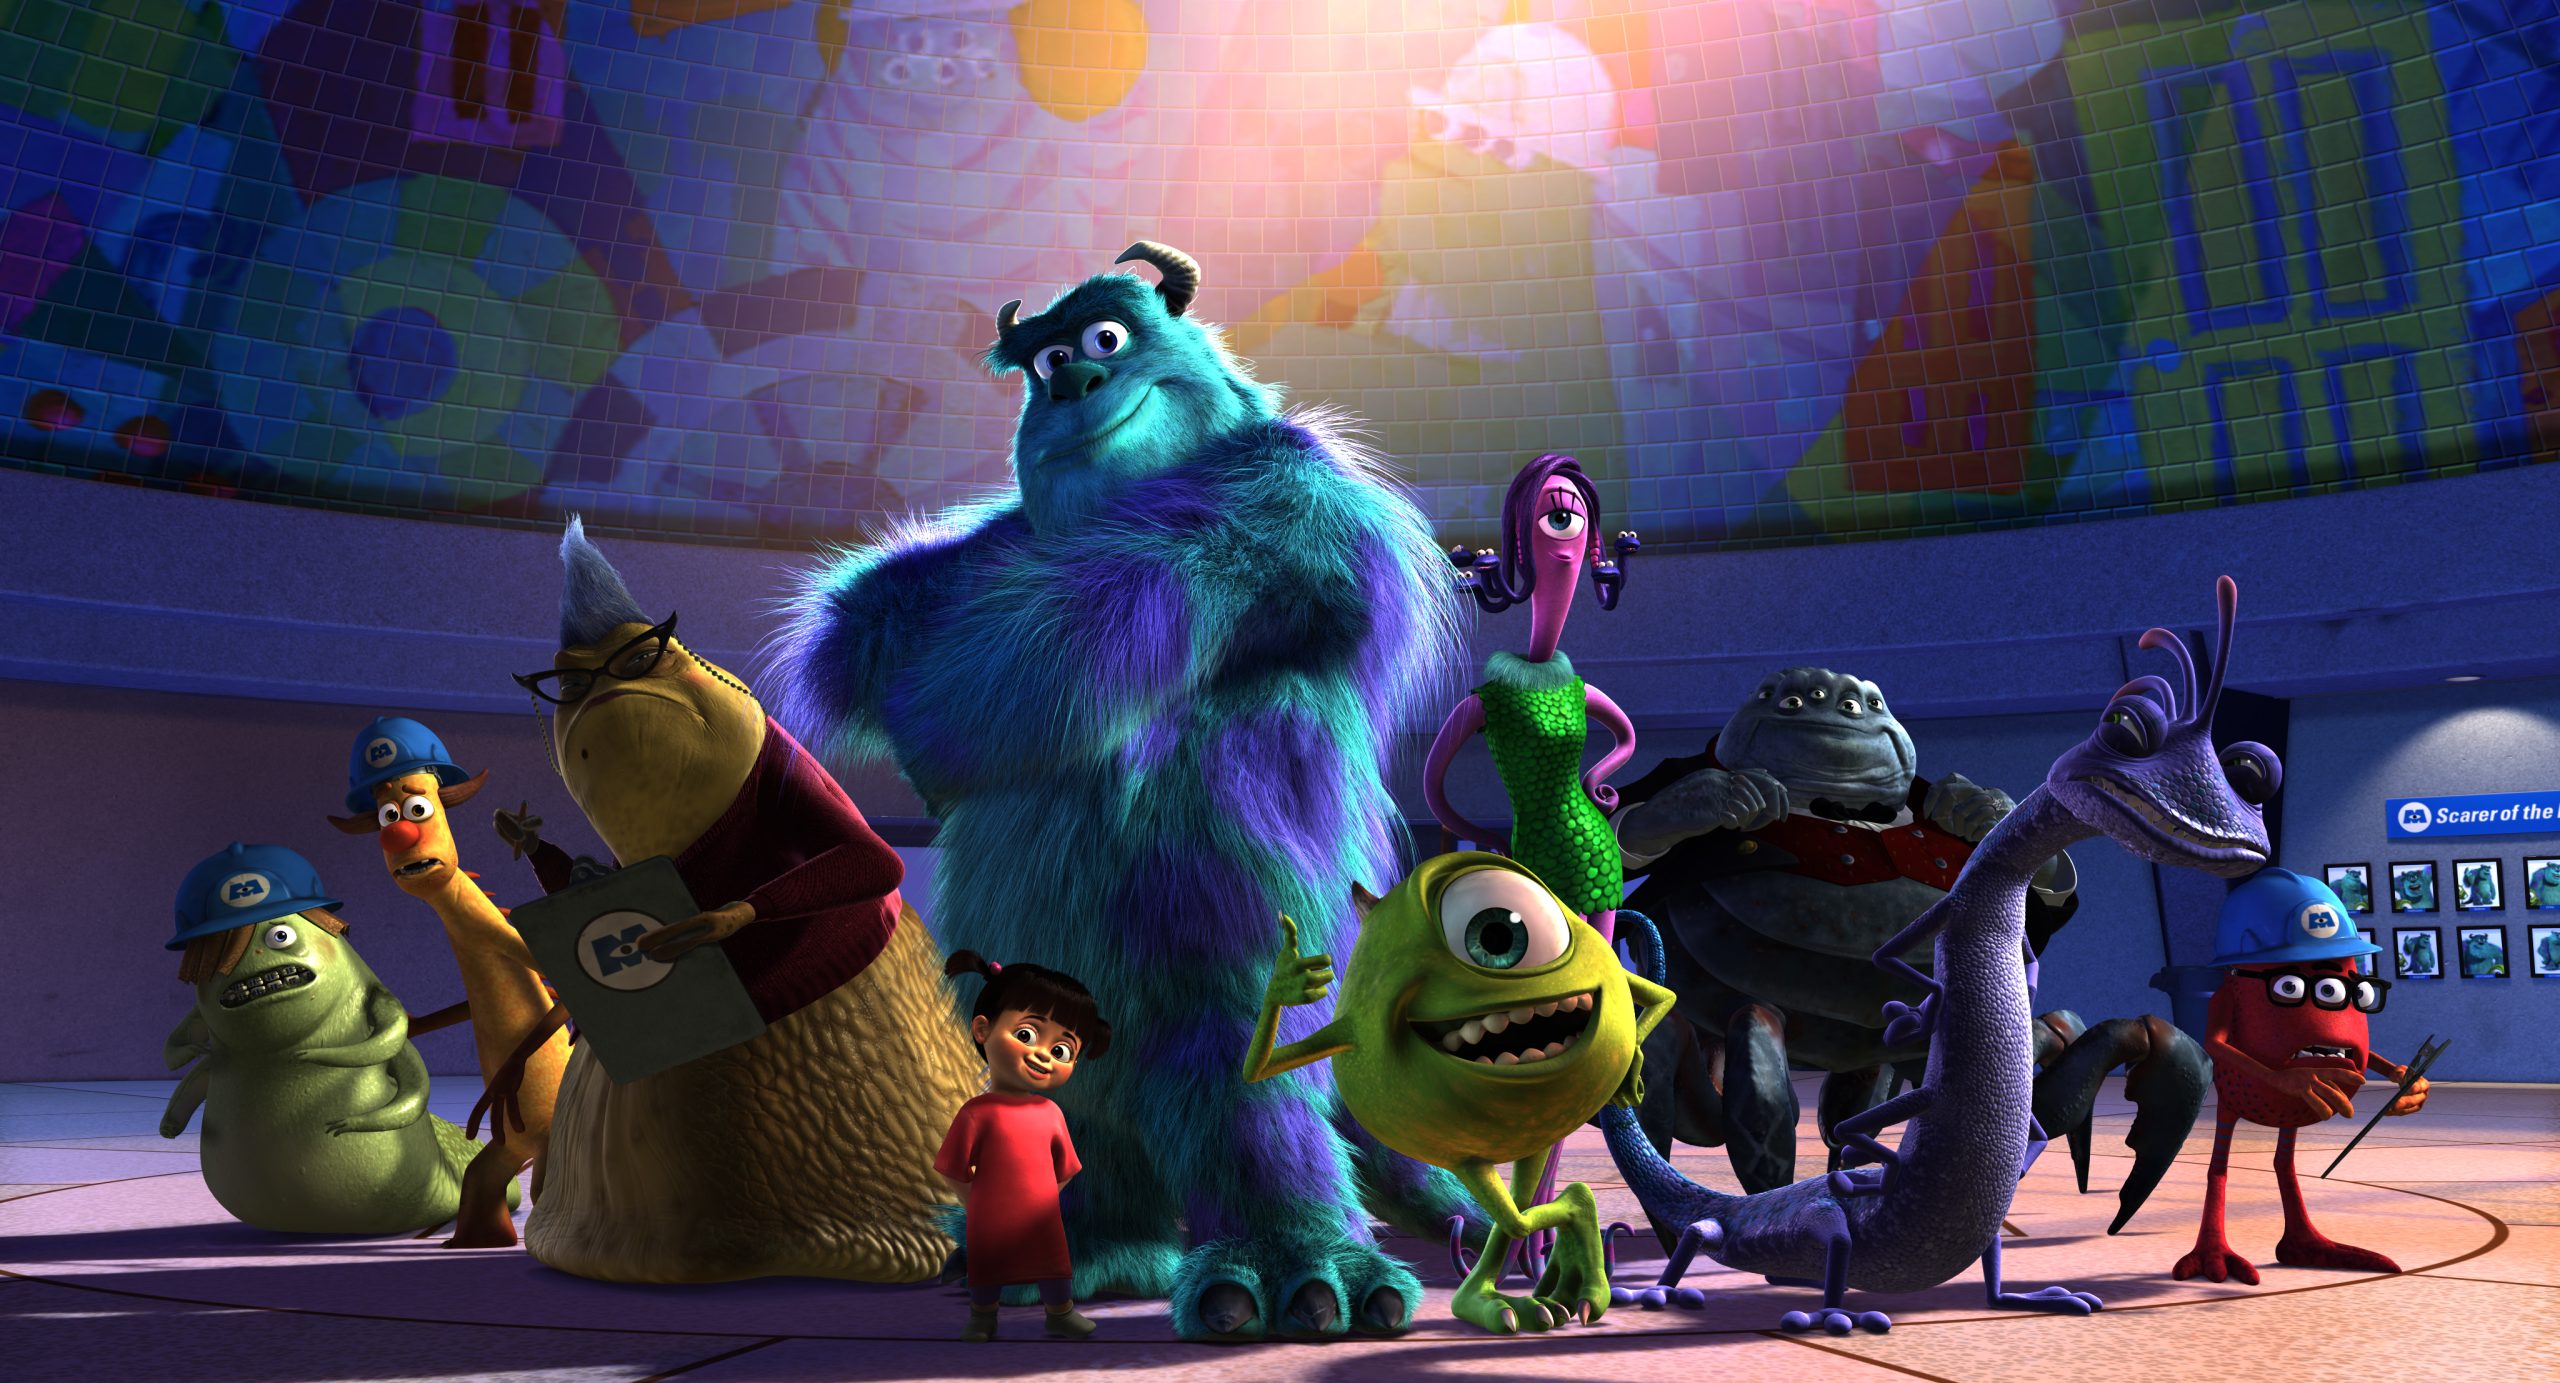 What is Monsters, Inc.